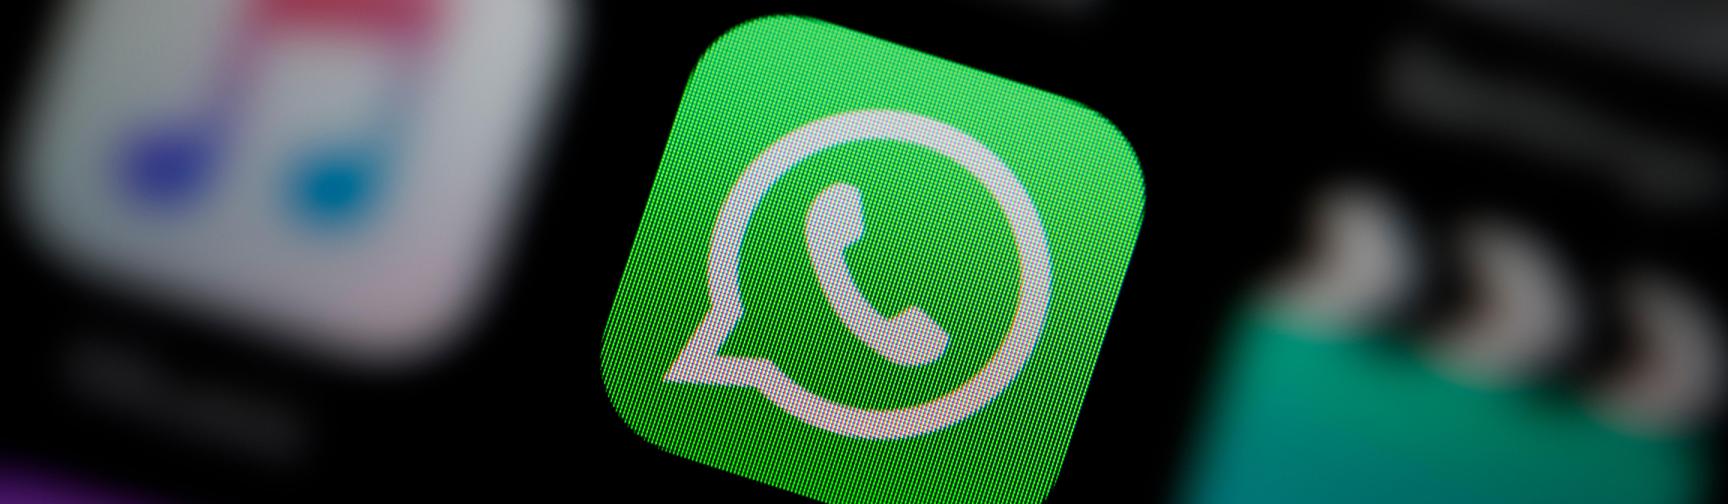 Close up of the WhatsApp icon on a smart phone